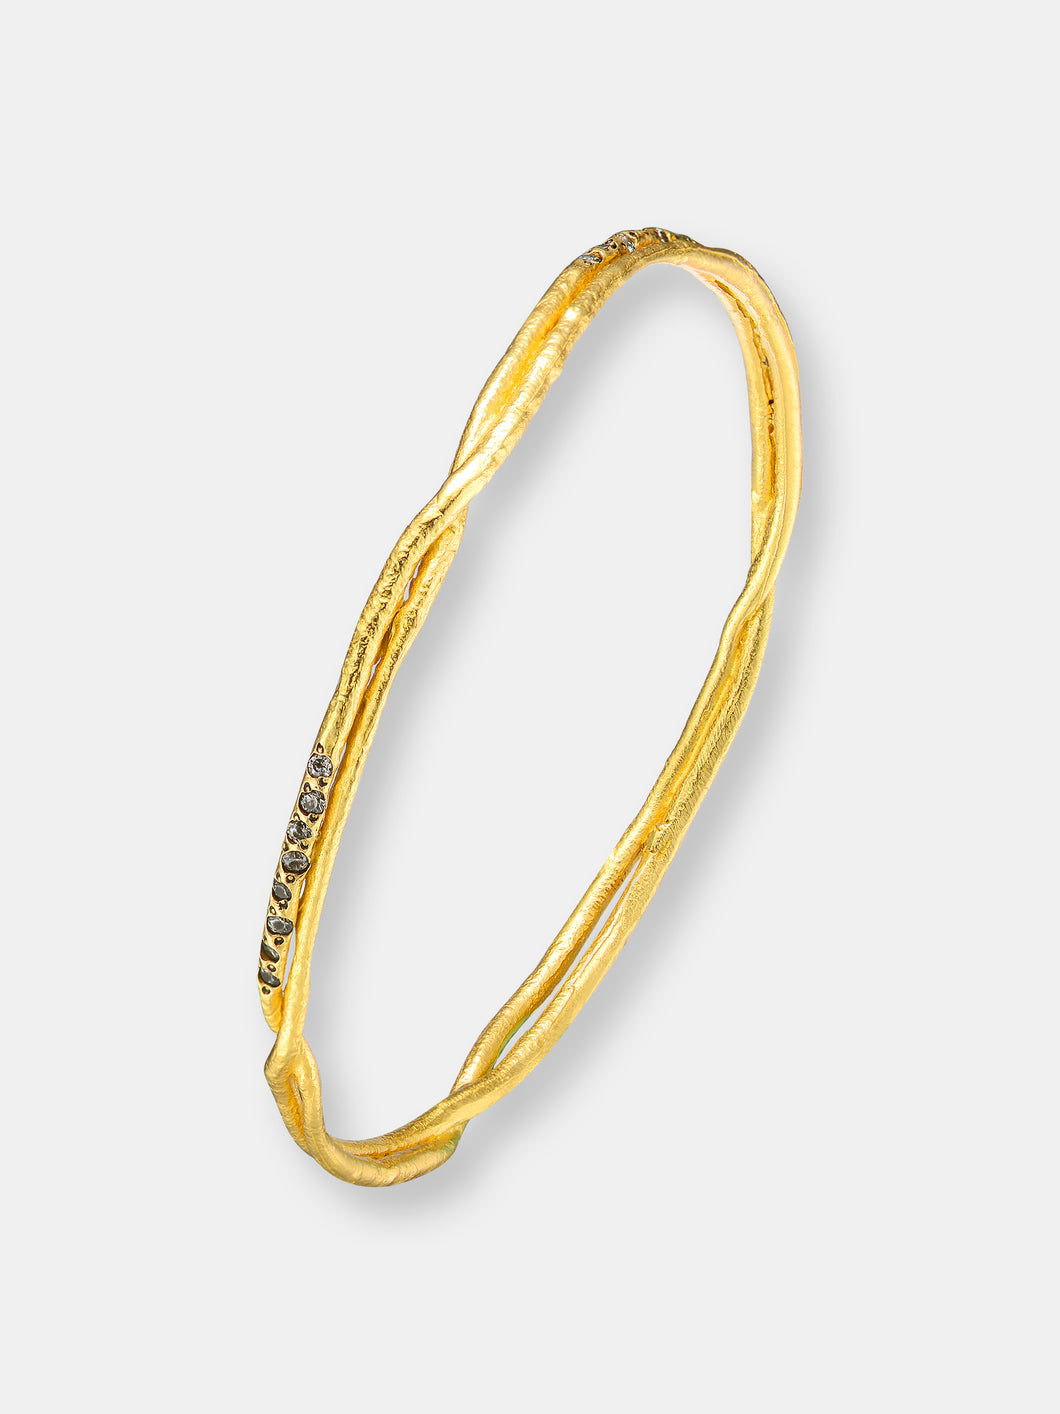 .925 Sterling Silver Gold Plated Cubic Zirconia Bangle Bracelet